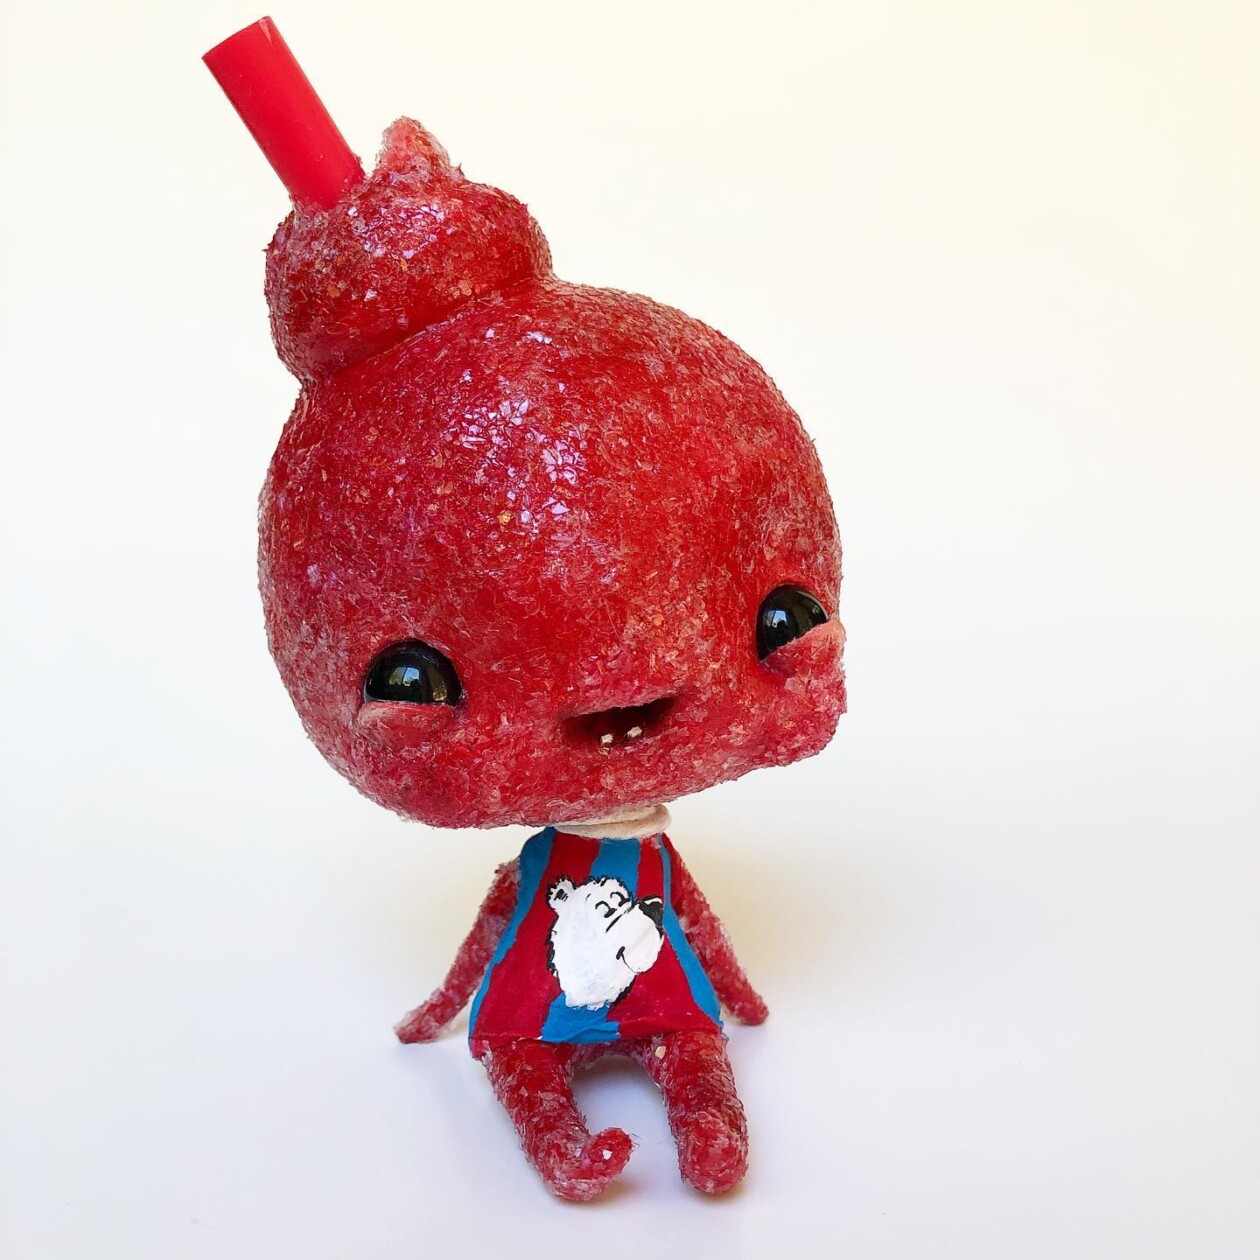 Cute And Creepy Little Monster Toys By Sara Duarte (7)